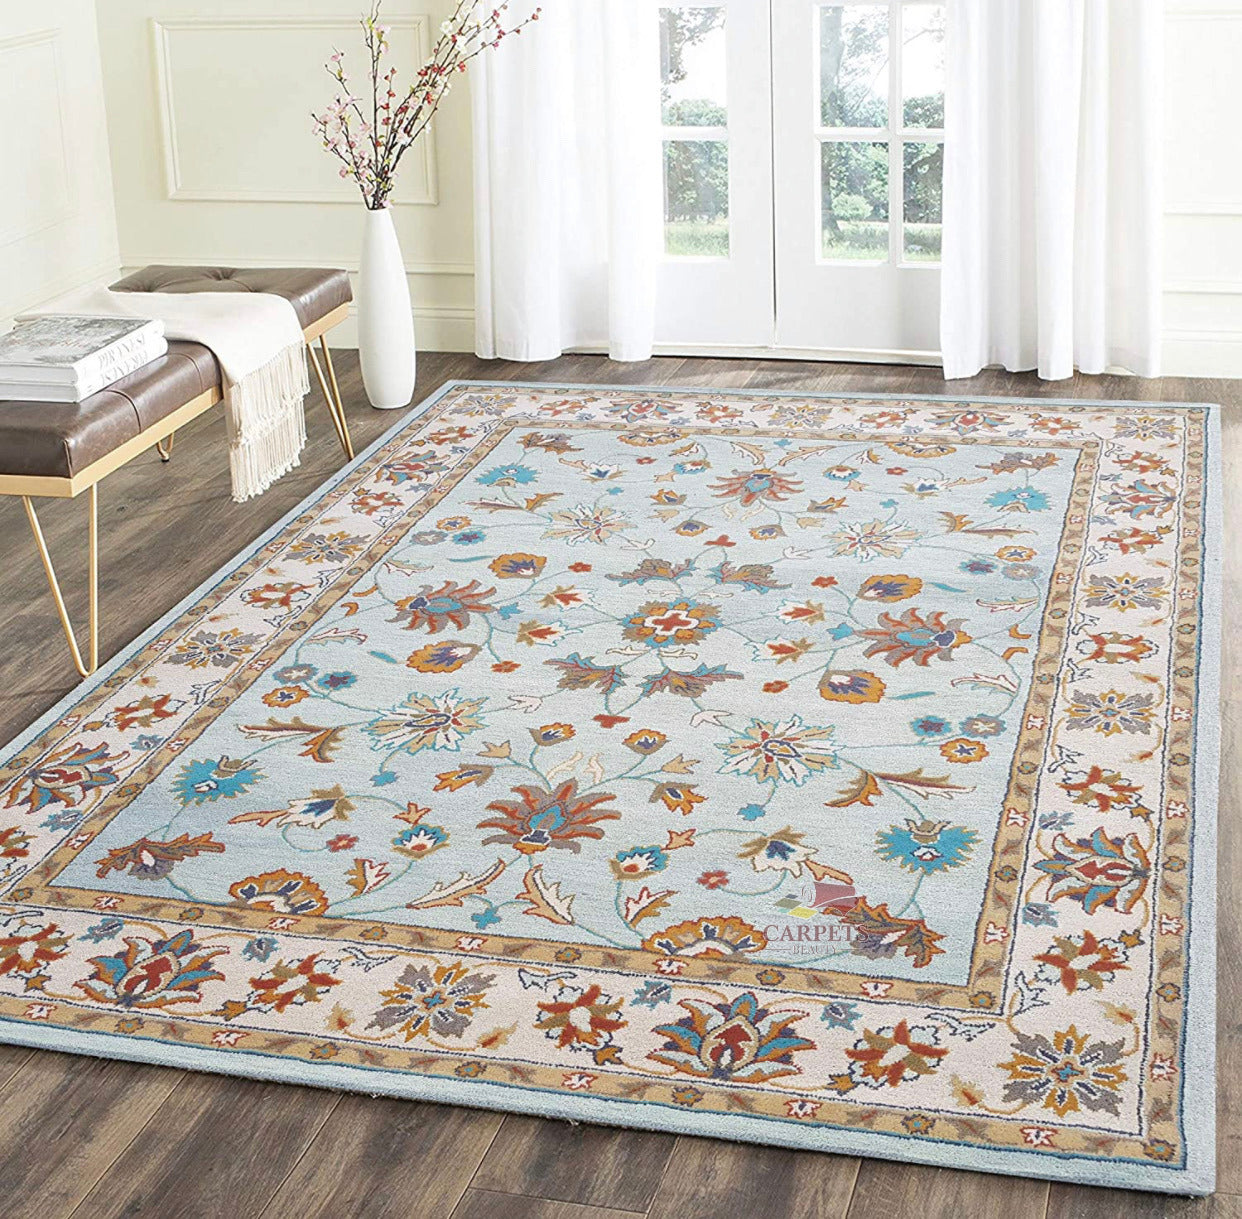 Multicolor unique Hand Tufted Persian Carpet for your sweet home